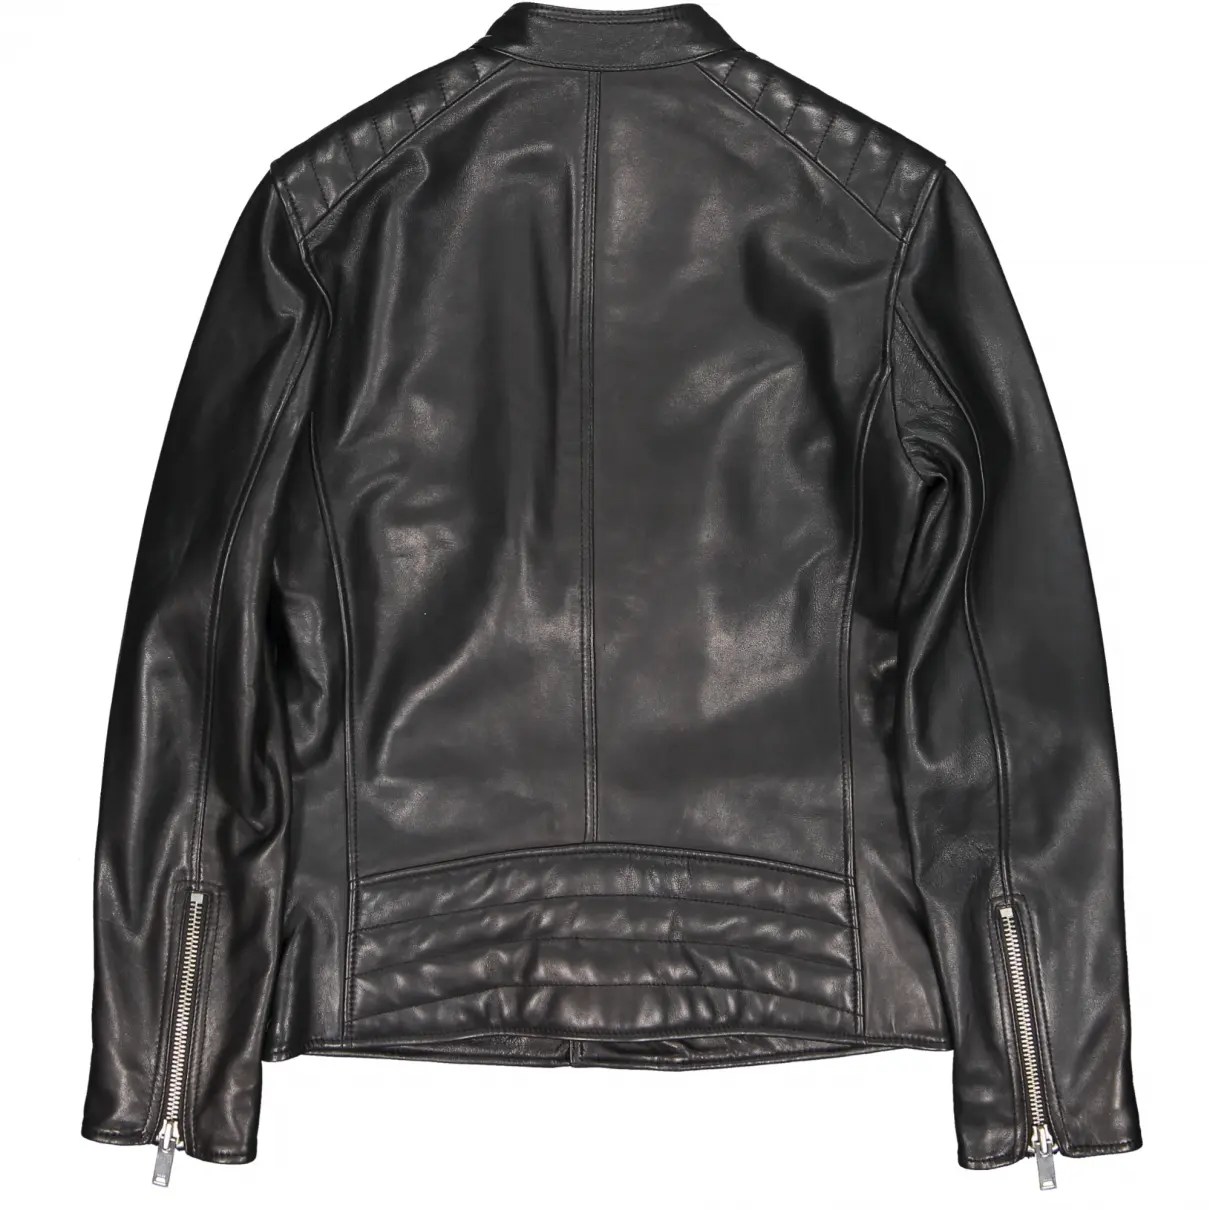 Reiss Leather jacket for sale